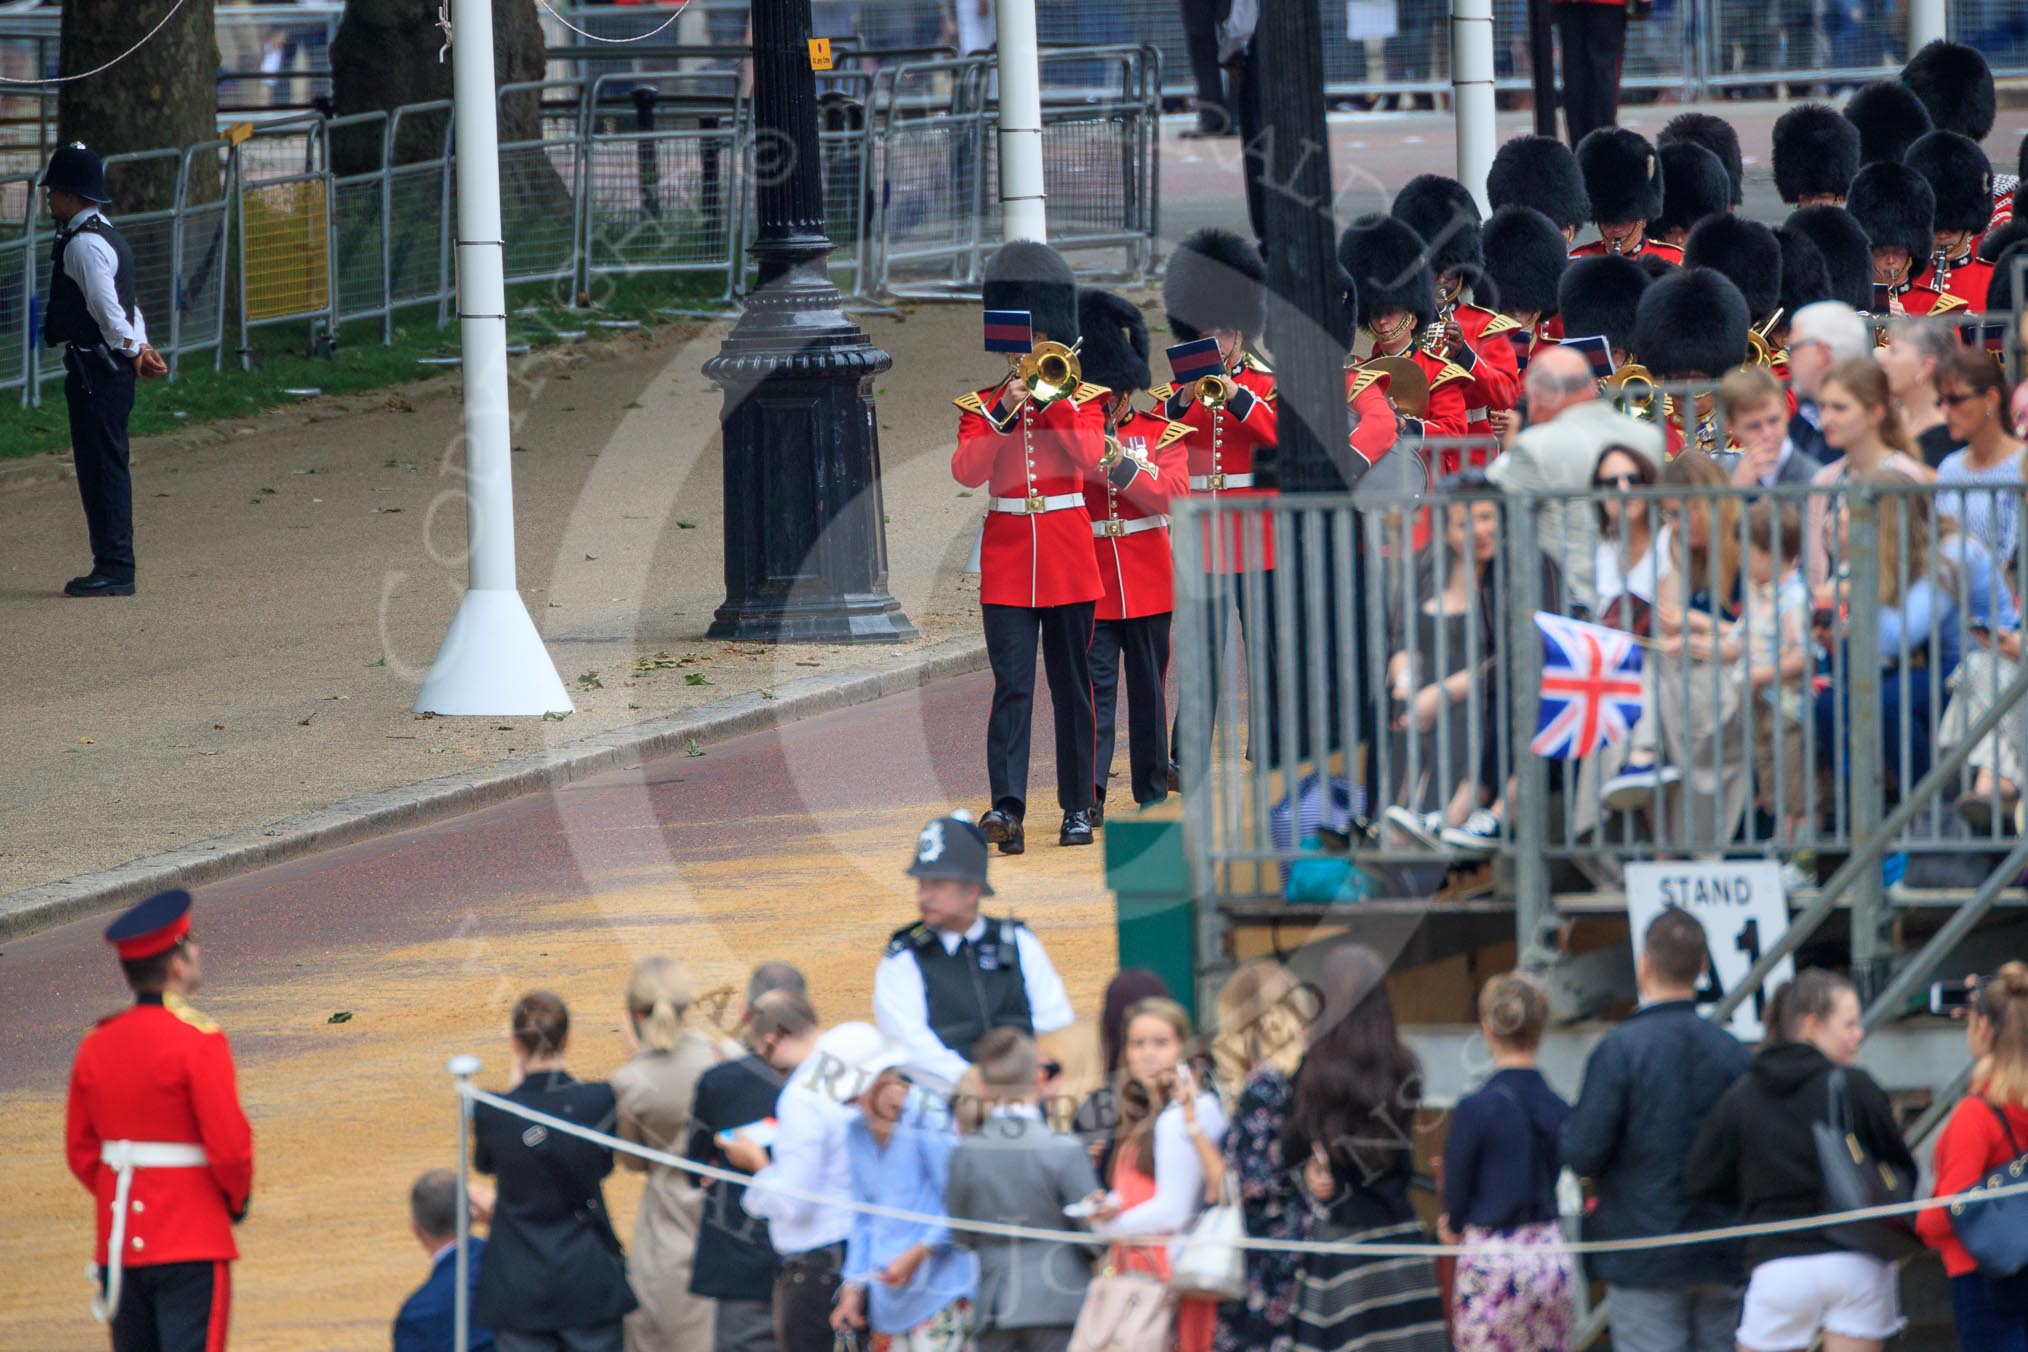 during The Colonel's Review {iptcyear4} (final rehearsal for Trooping the Colour, The Queen's Birthday Parade)  at Horse Guards Parade, Westminster, London, 2 June 2018, 10:23.